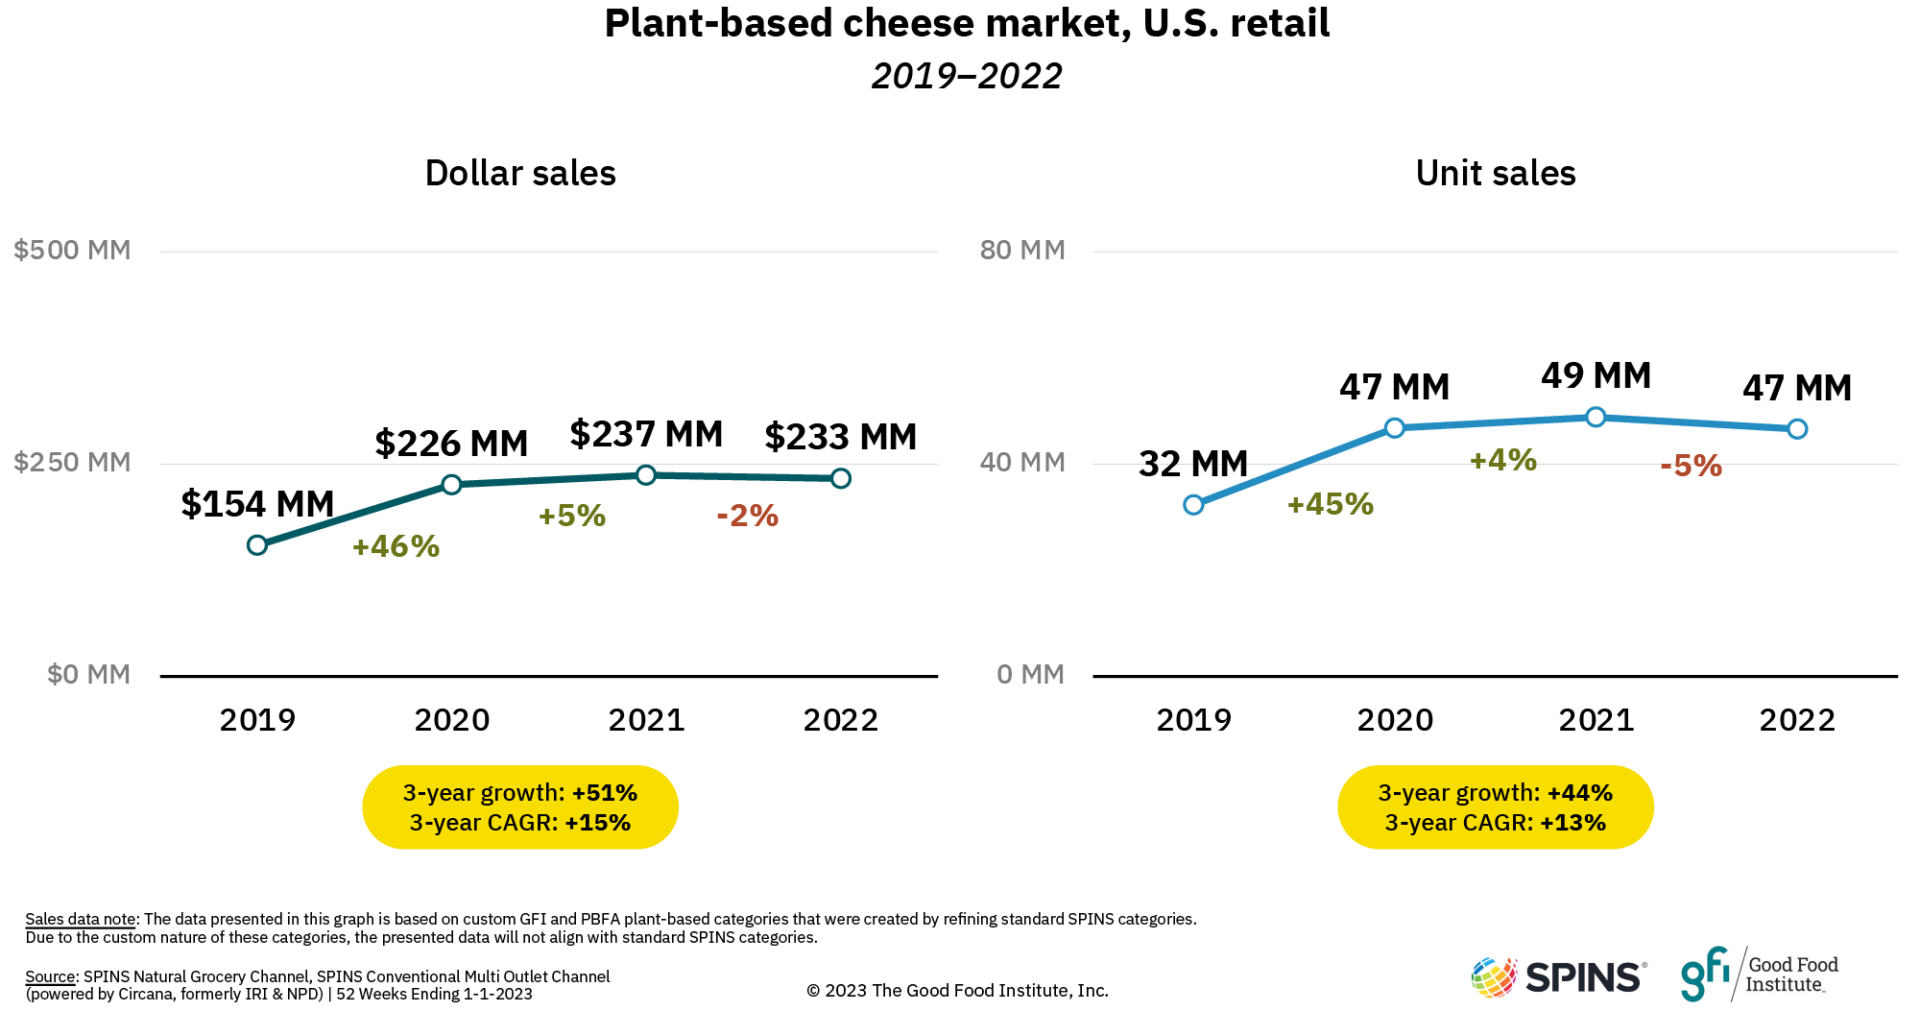 Summary of plant-based cheese sales data